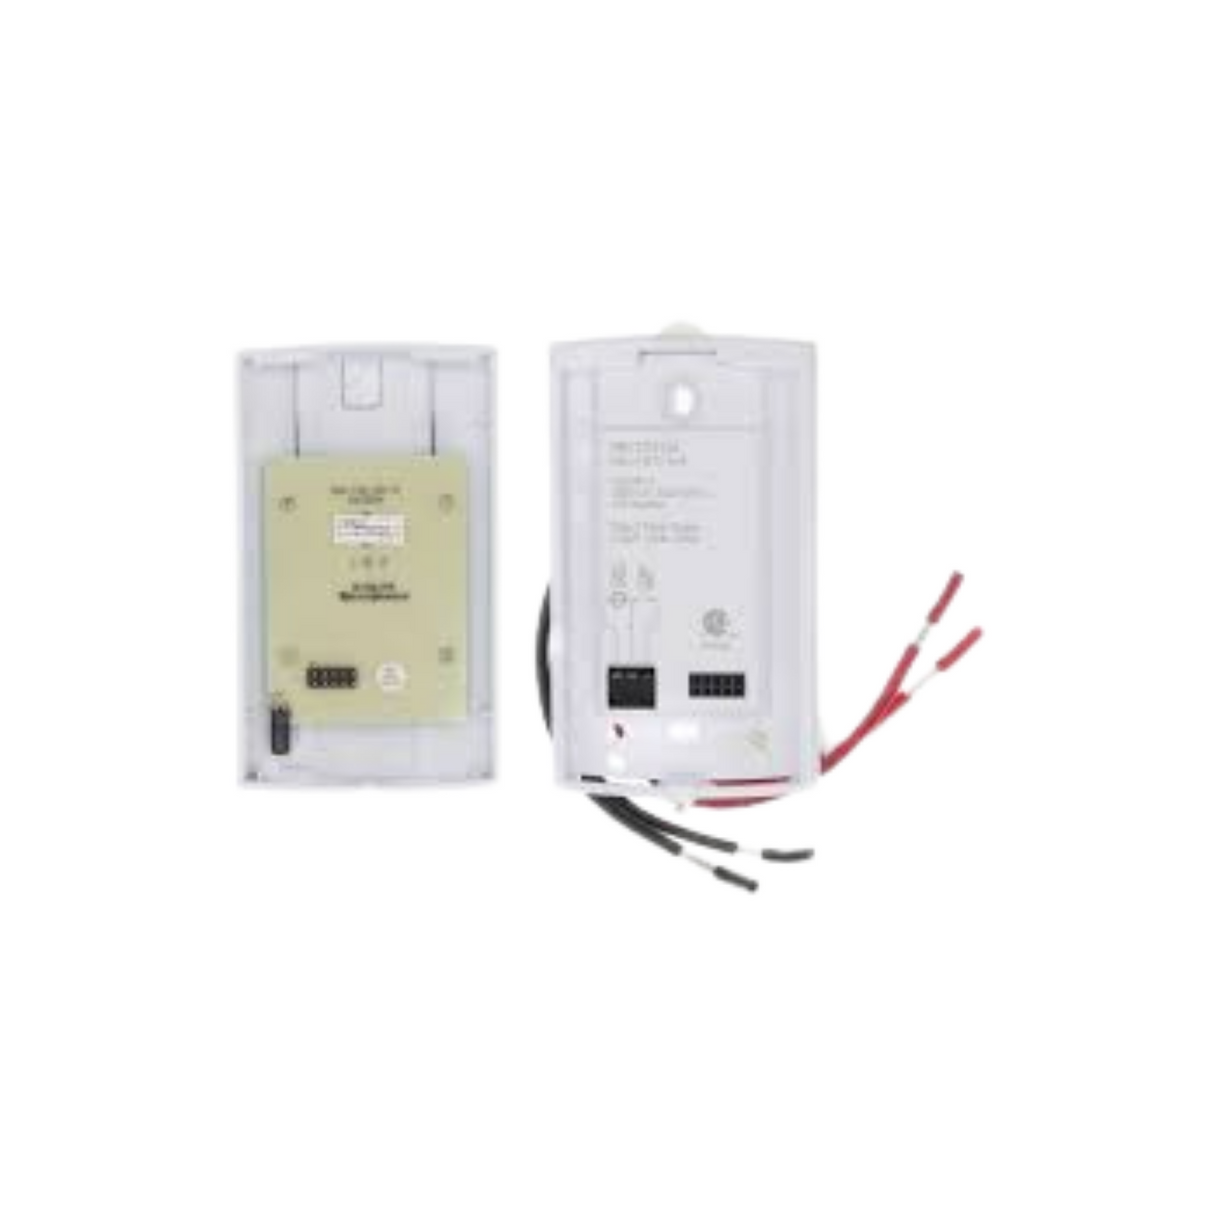 Honeywell CT230-GA - Dual Voltage Line Volt Slave Unit, For Floor Heating over 15 Amp, With 5 mA GFCI, Vertical Mount, 120/240 Vac, 32-122 Degree Operating Temperature Range, White, DPST, Hardwired